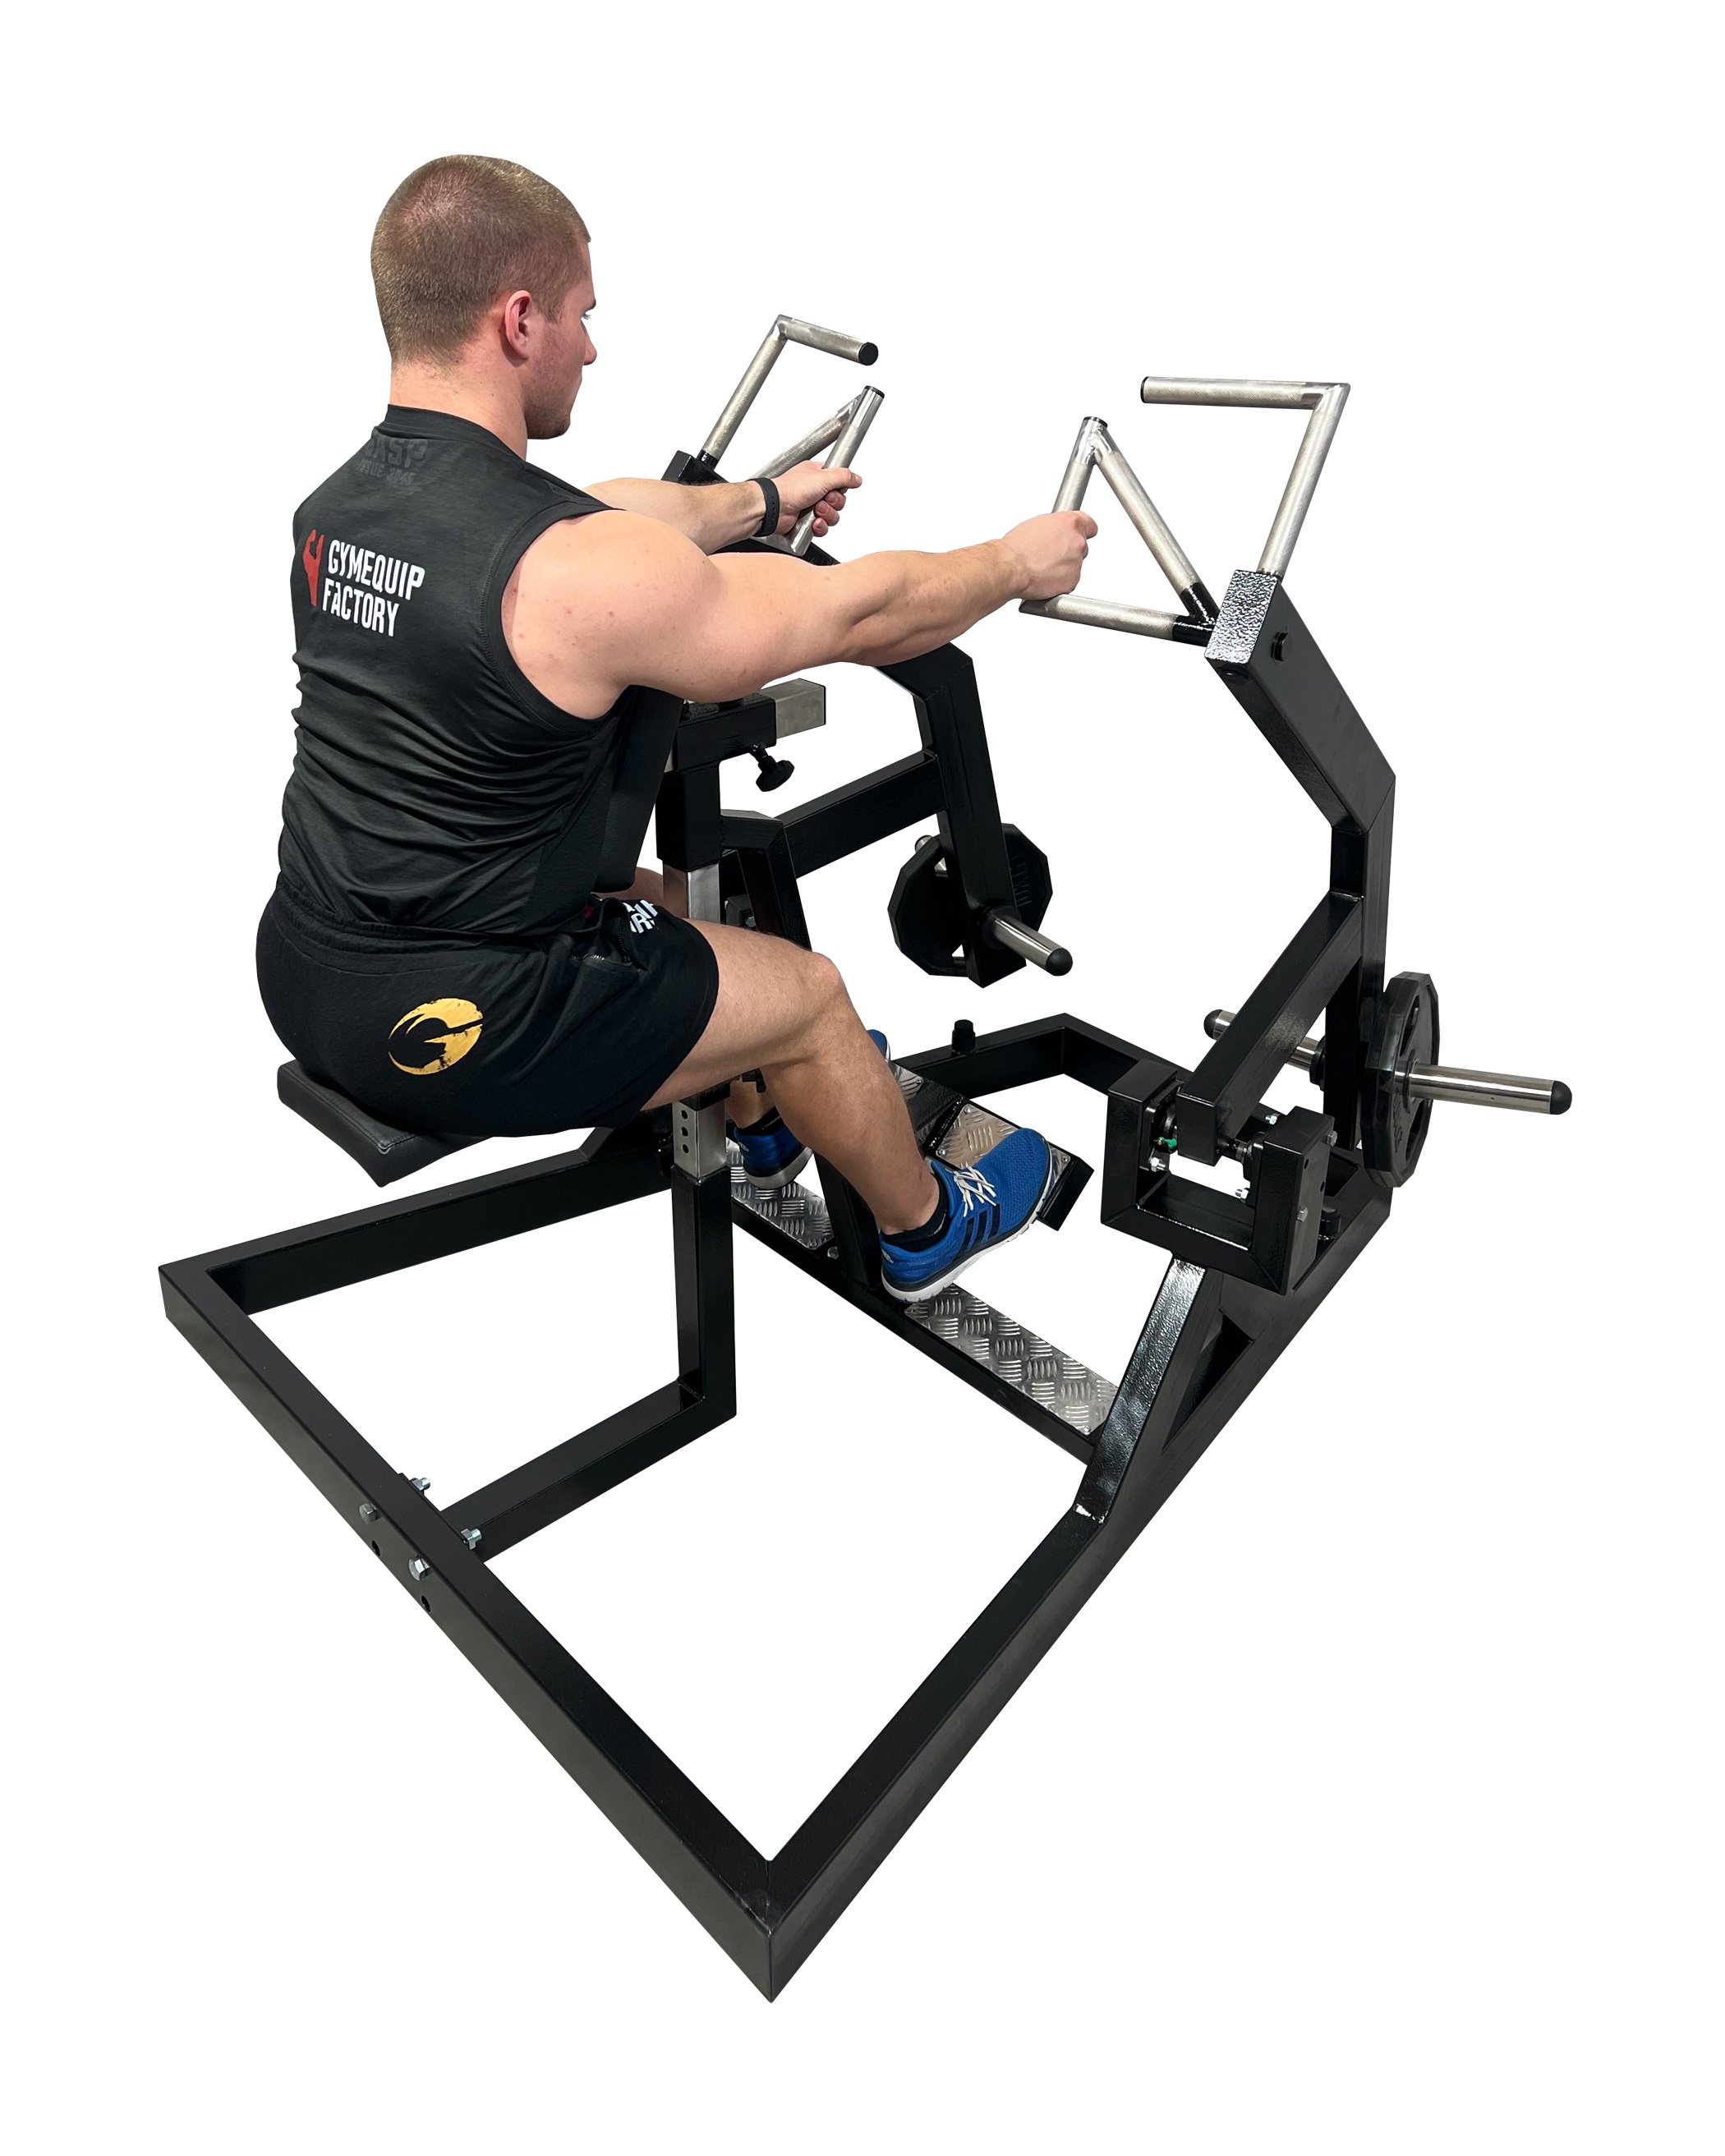 https://www.gymequip.eu/wp-content/uploads/2015/10/Lever-Seated-Row-Machine-1.jpg